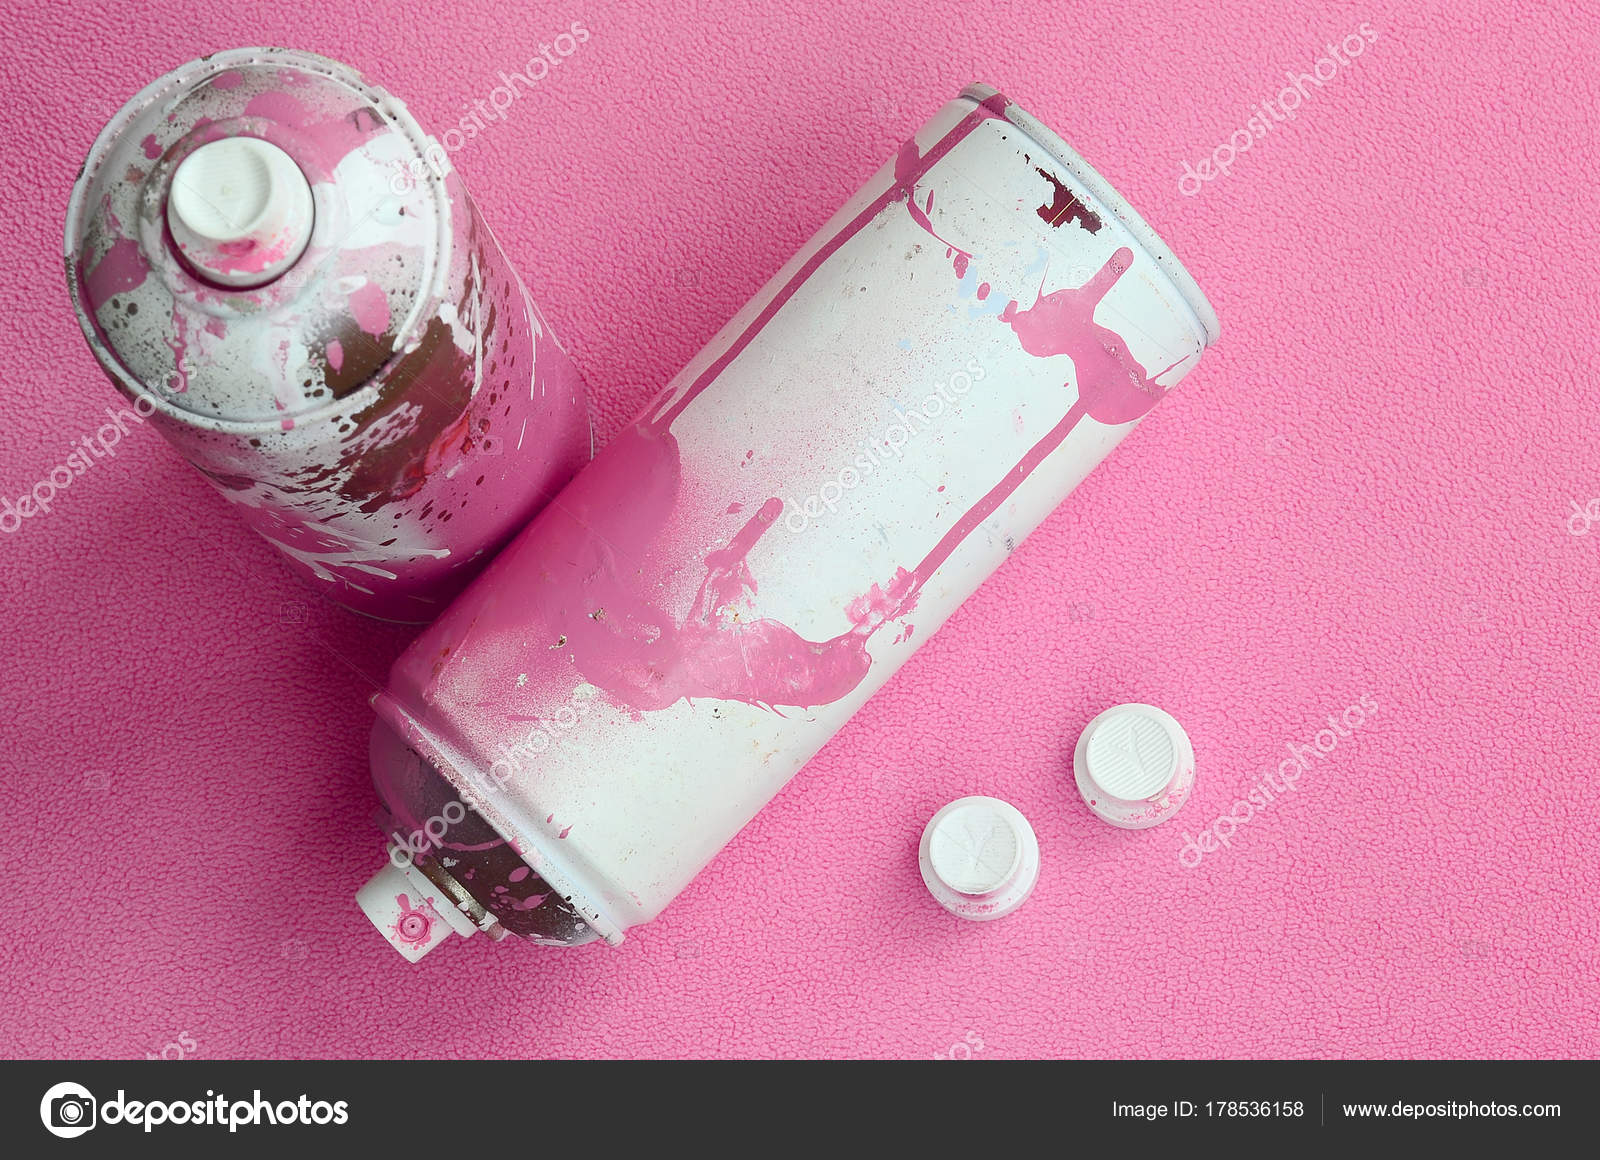 Some Used Pink Aerosol Spray Cans Nozzles Paint Drips Lies Stock